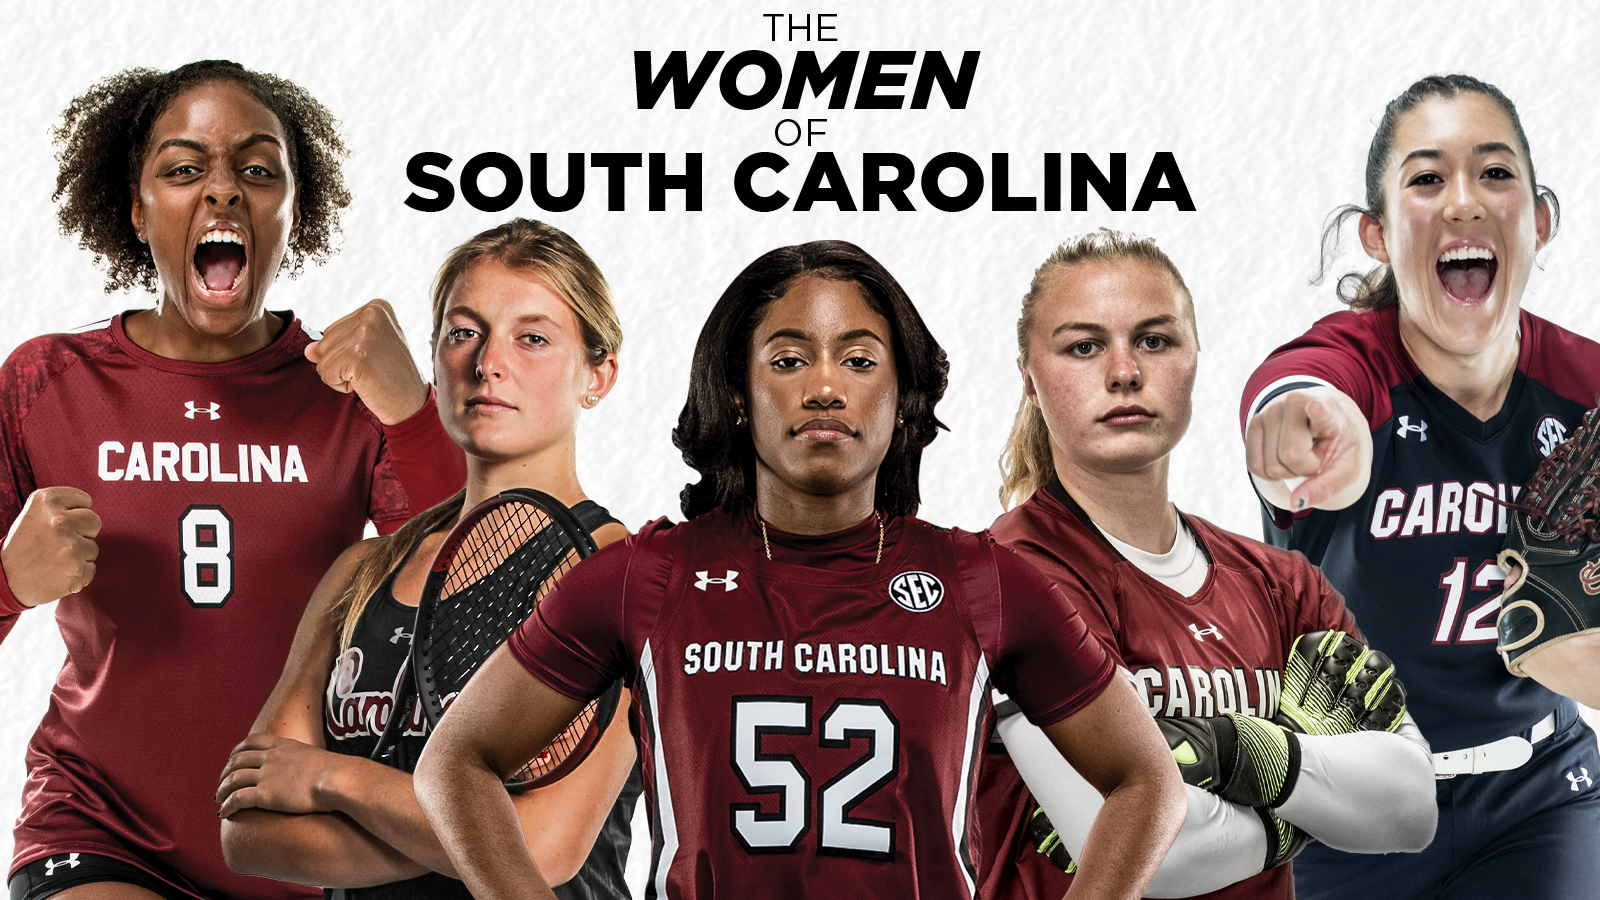 The Women of South Carolina Initiative Launched